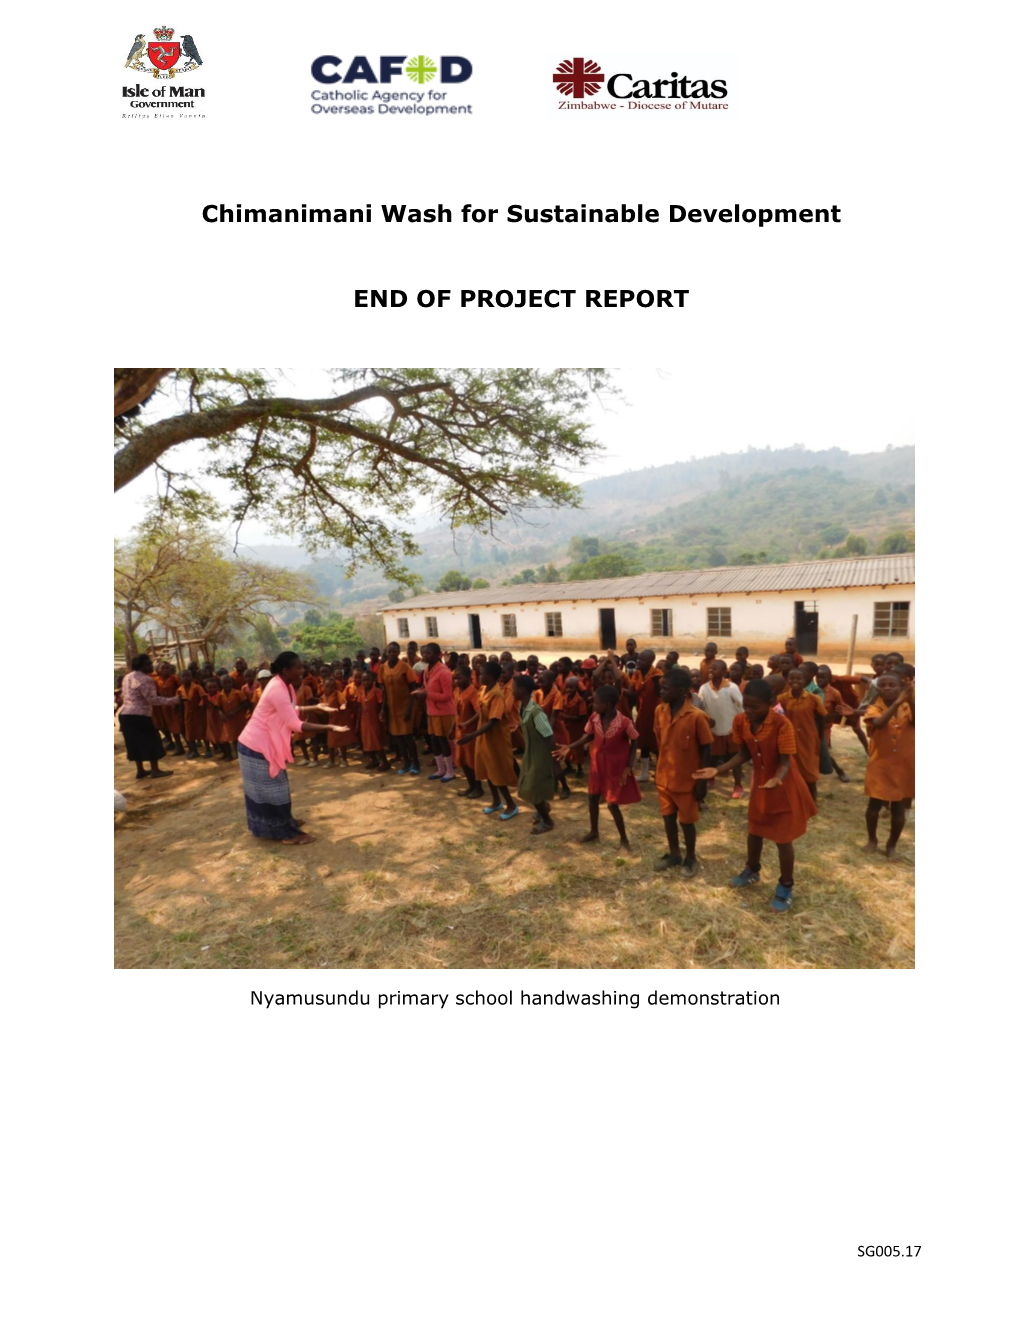 Chimanimani Wash for Sustainable Development END of PROJECT